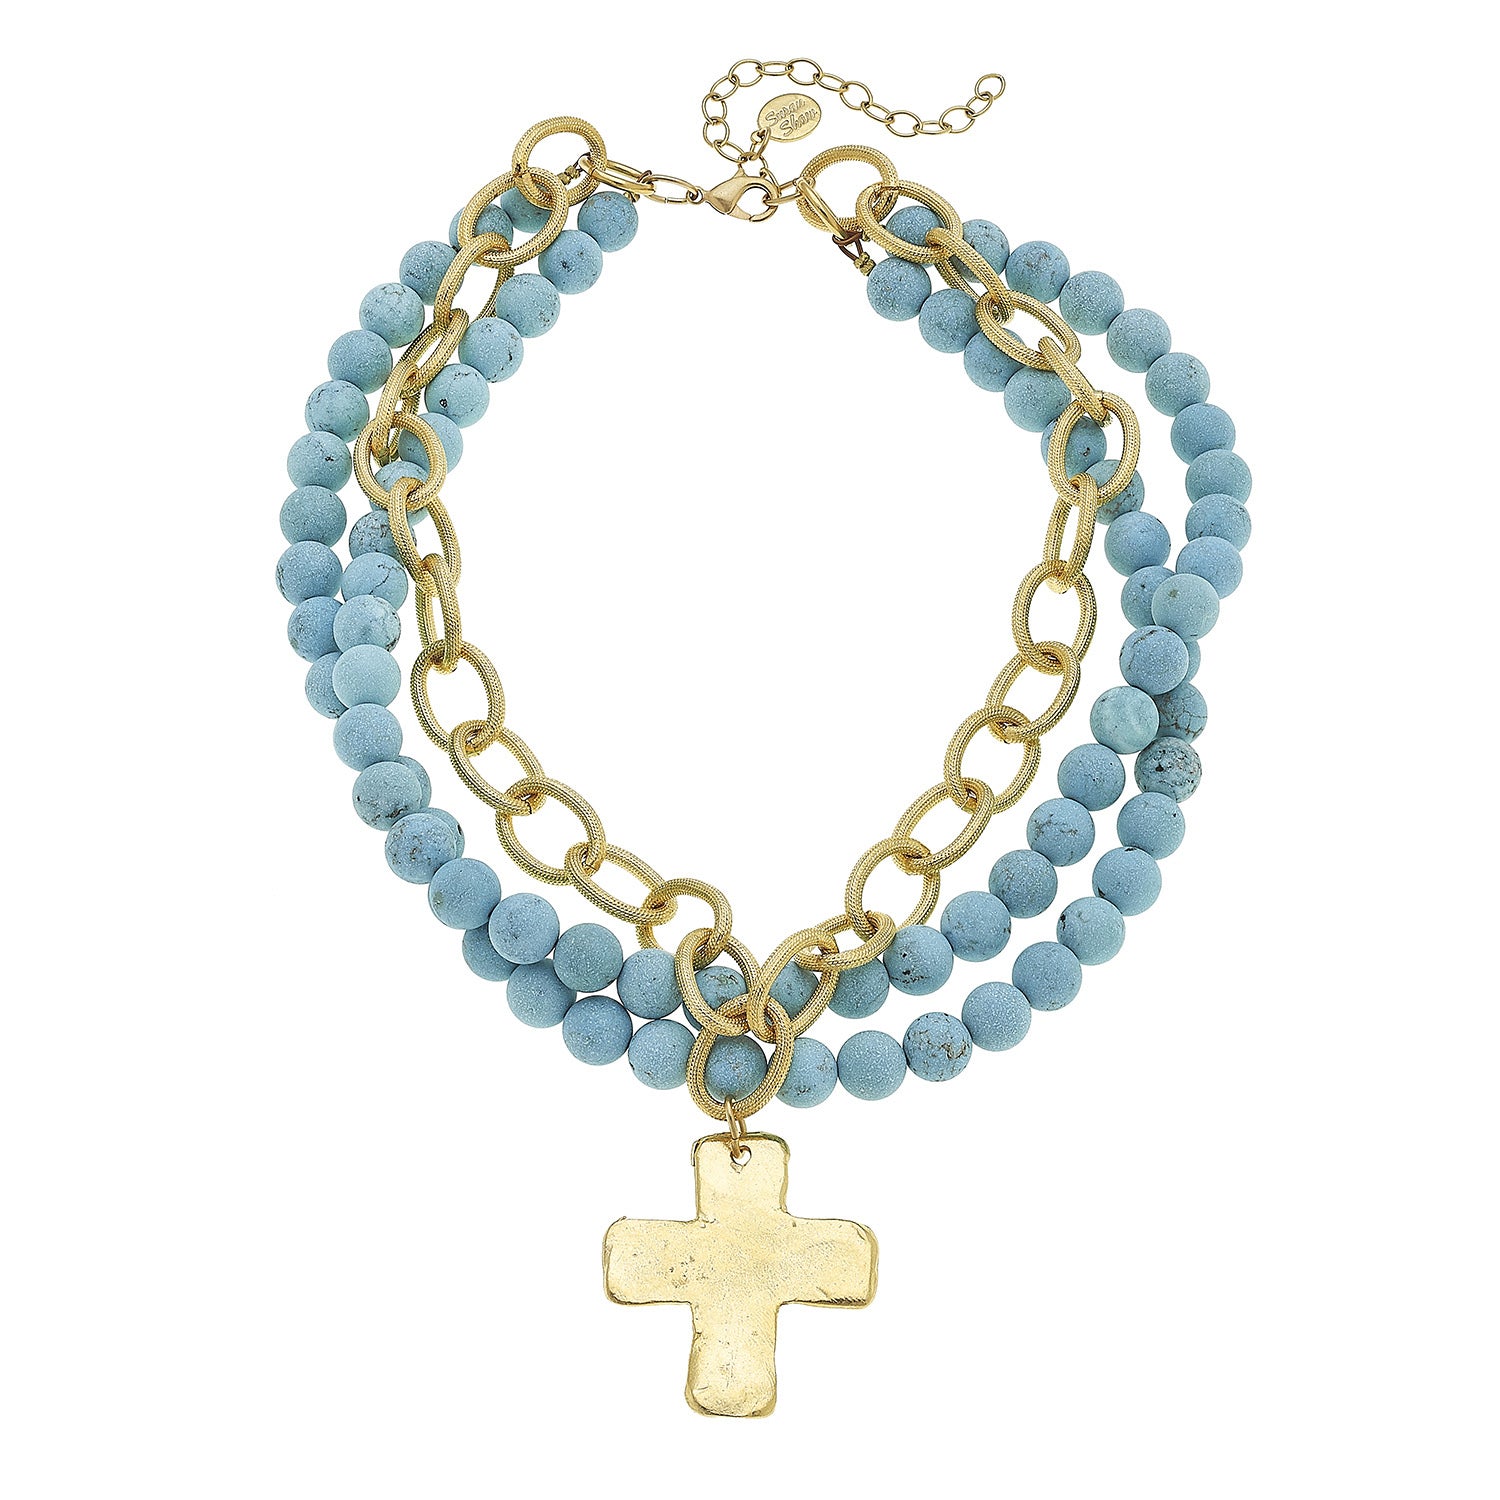 Susan Shaw Jewelry Turquoise Cross Necklace, 3 Strand Matte Turquoise Bead Cross Pendant in Gold